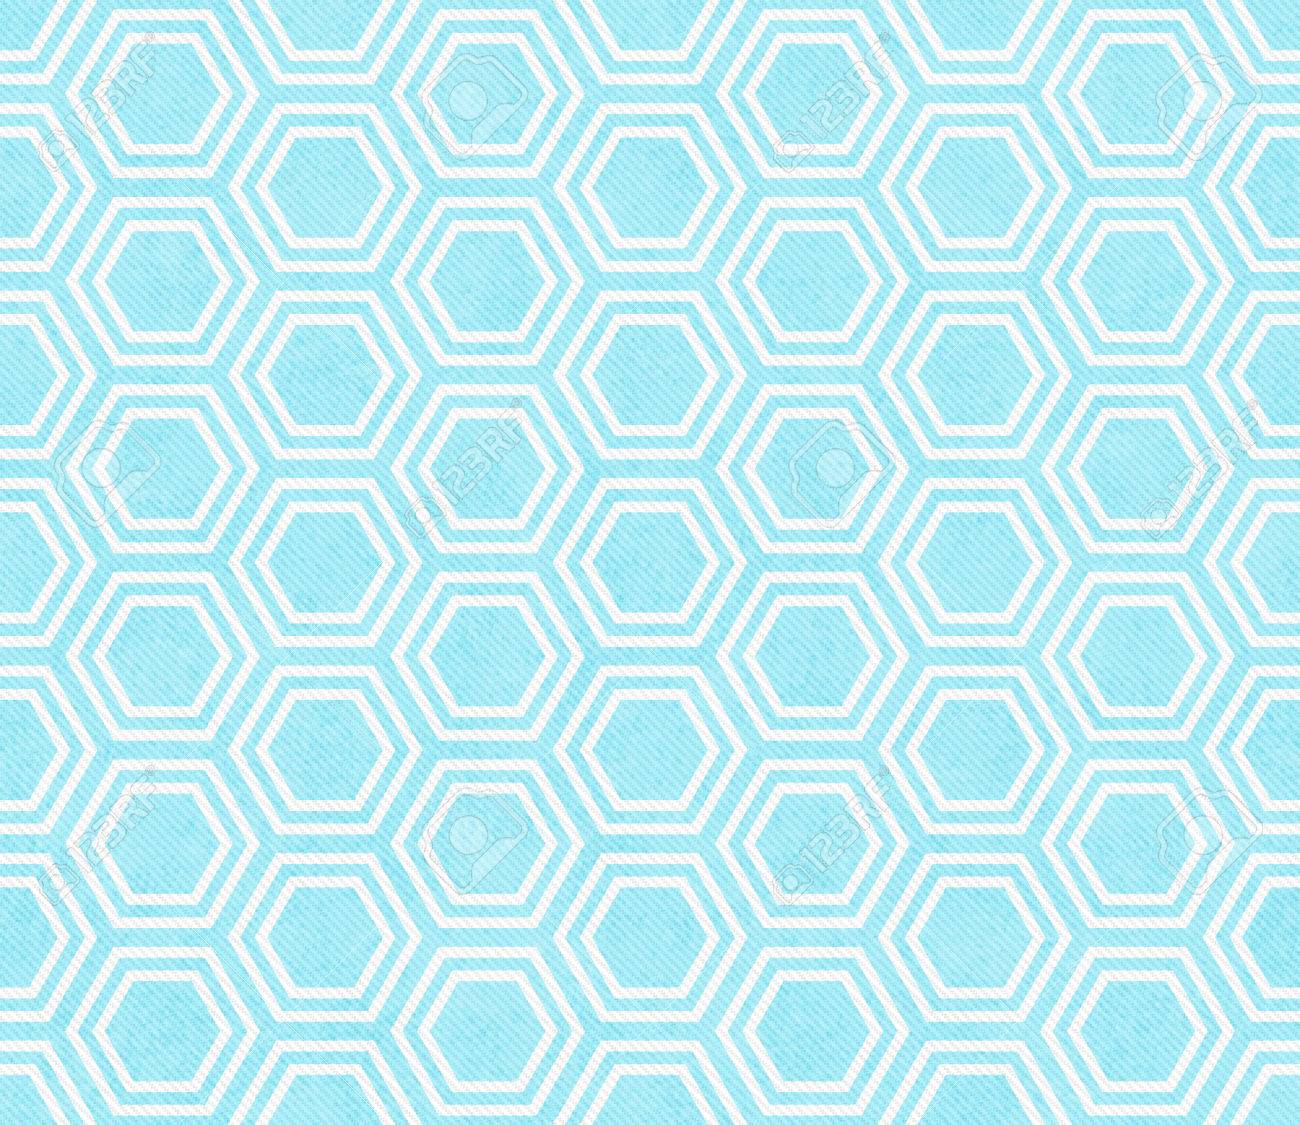 Teal And White Hexagon Tile Pattern Repeat Background That Is